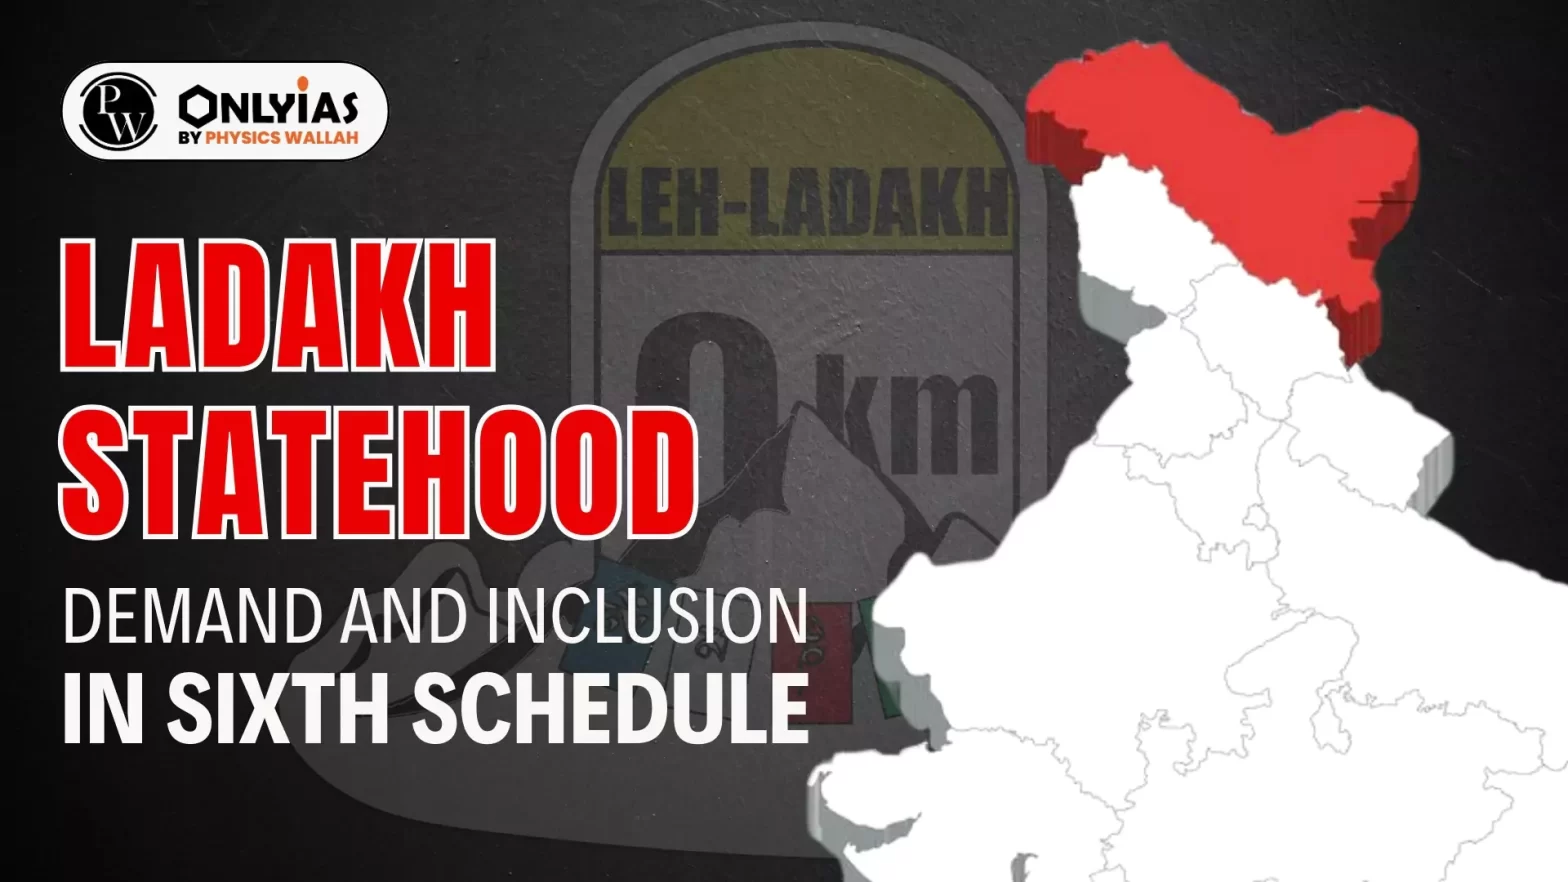 Ladakh Statehood Demand and Inclusion in Sixth Schedule